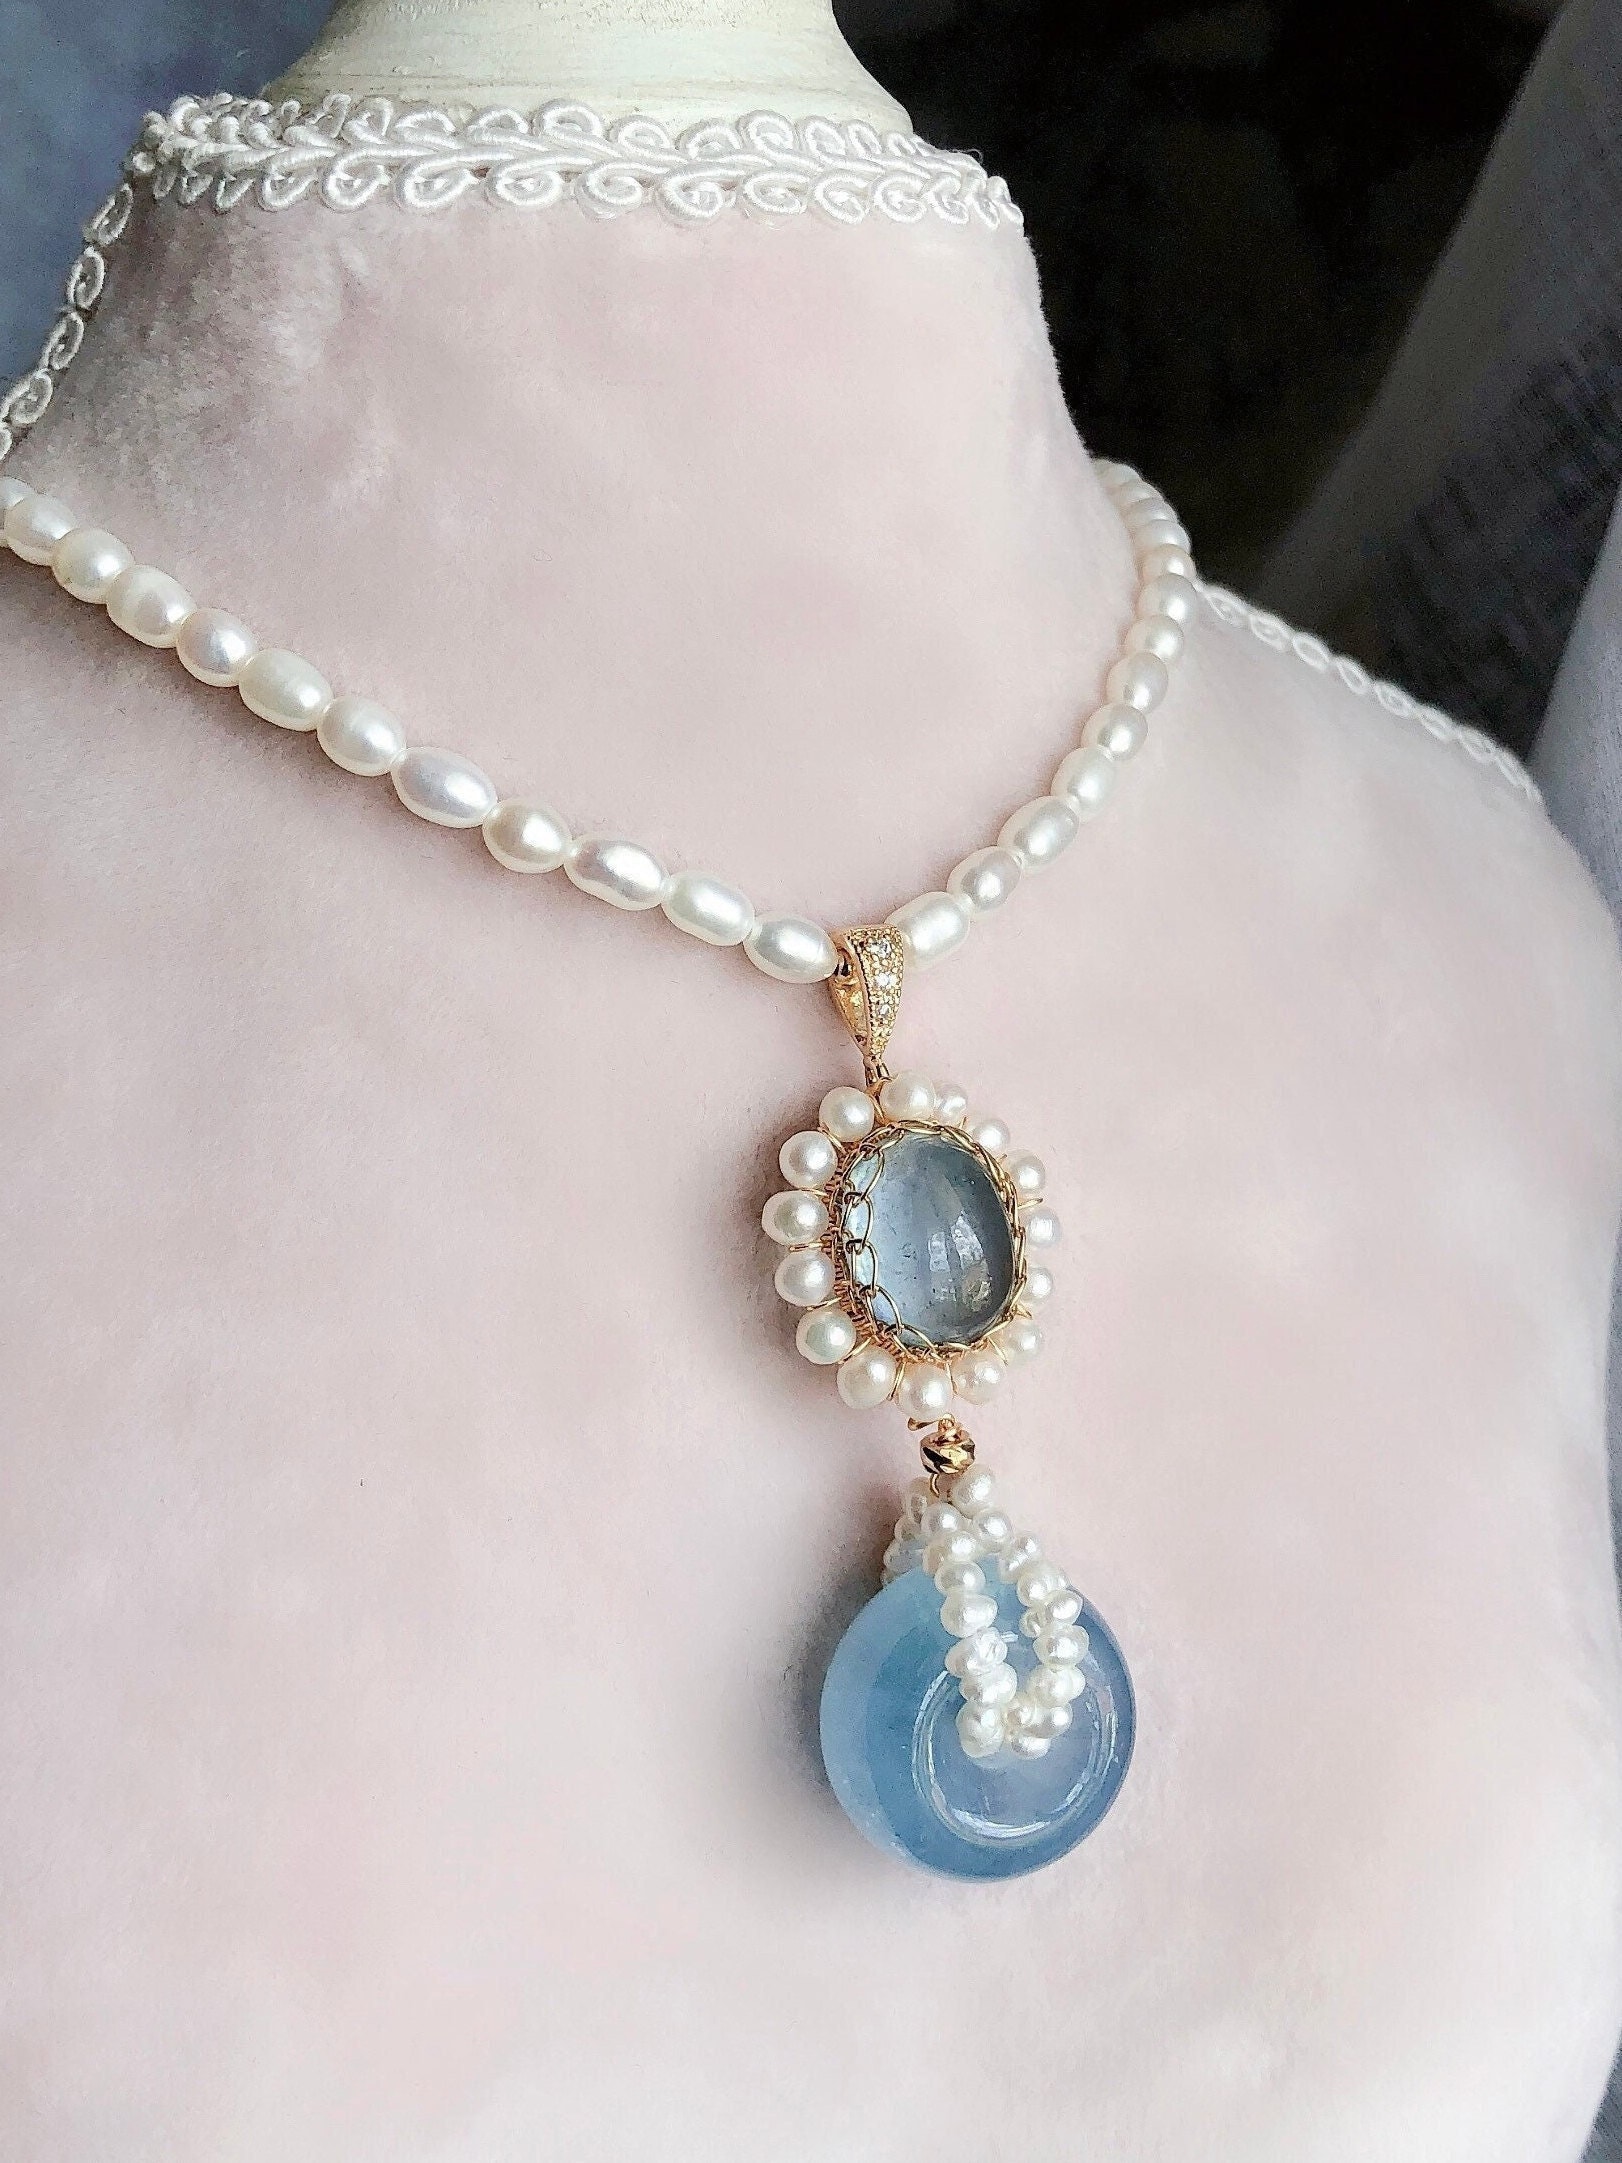 Ross-Simons Aquamarine Bead and 5-6mm Cultured Pearl Torsade Necklace With  Free Bracelet, Women's, Adult - Walmart.com